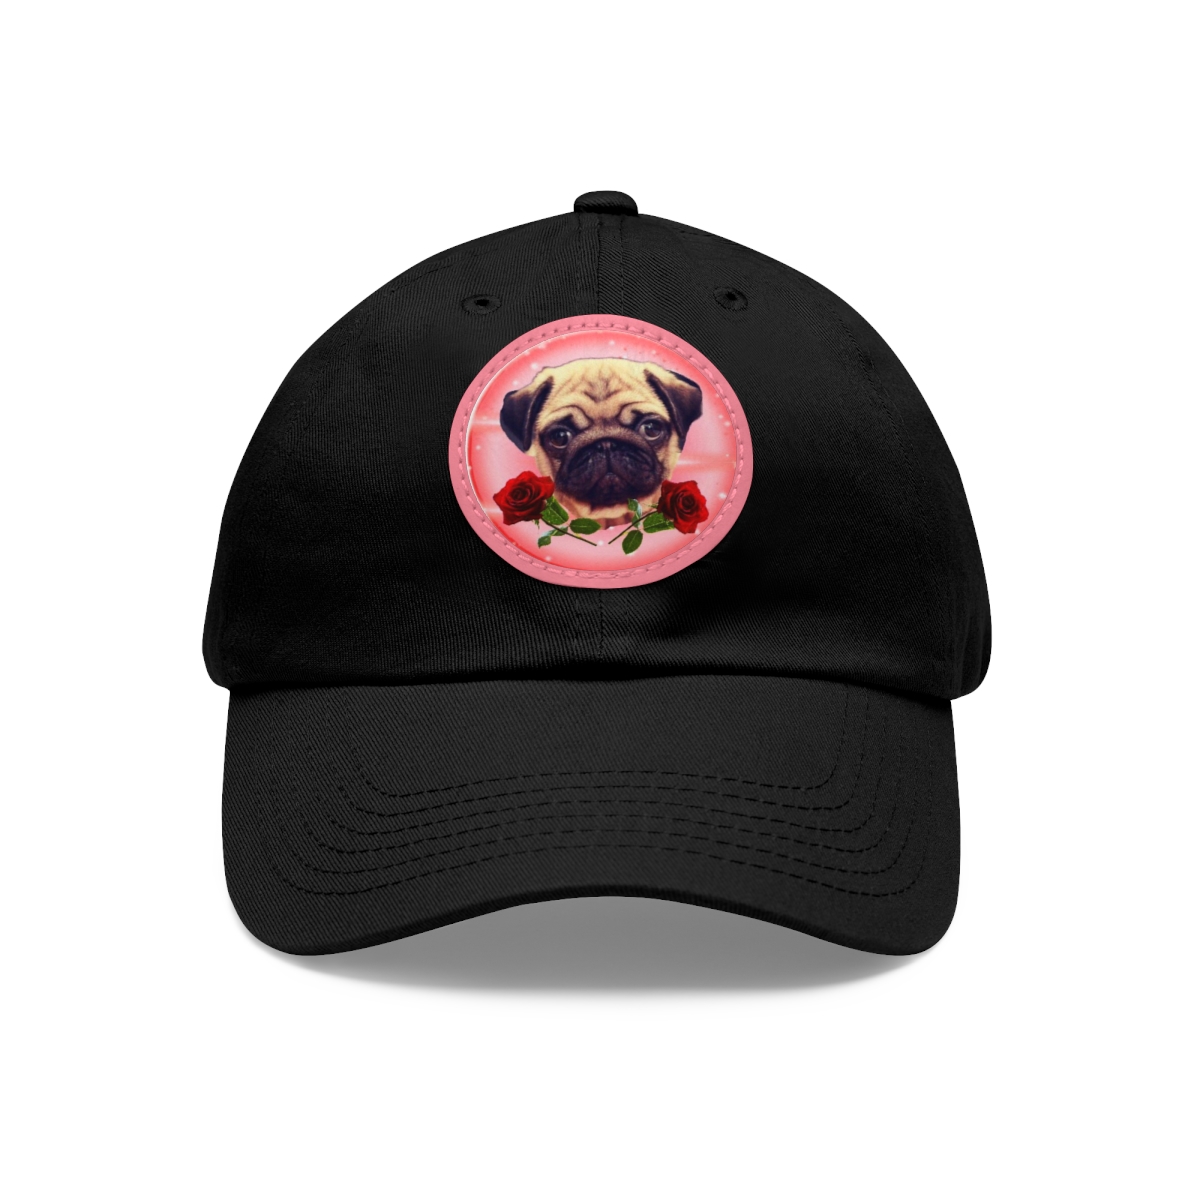 Official Bob the Dog hat product thumbnail image